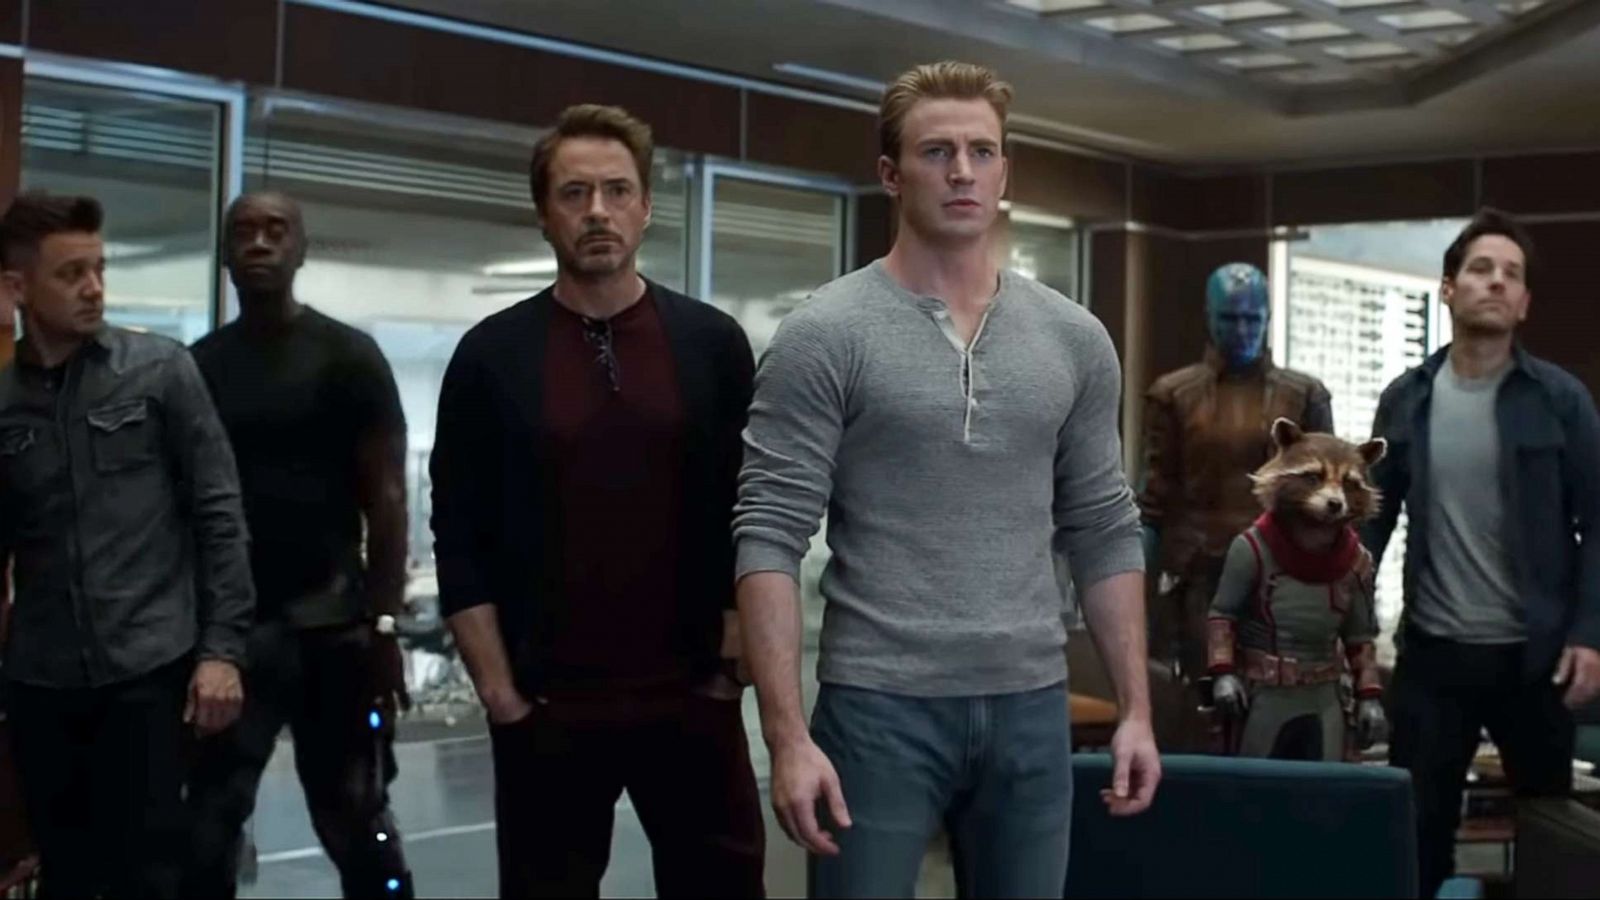 The Avengers: Endgame Cast And Crew Are Thanking Everyone Who Made